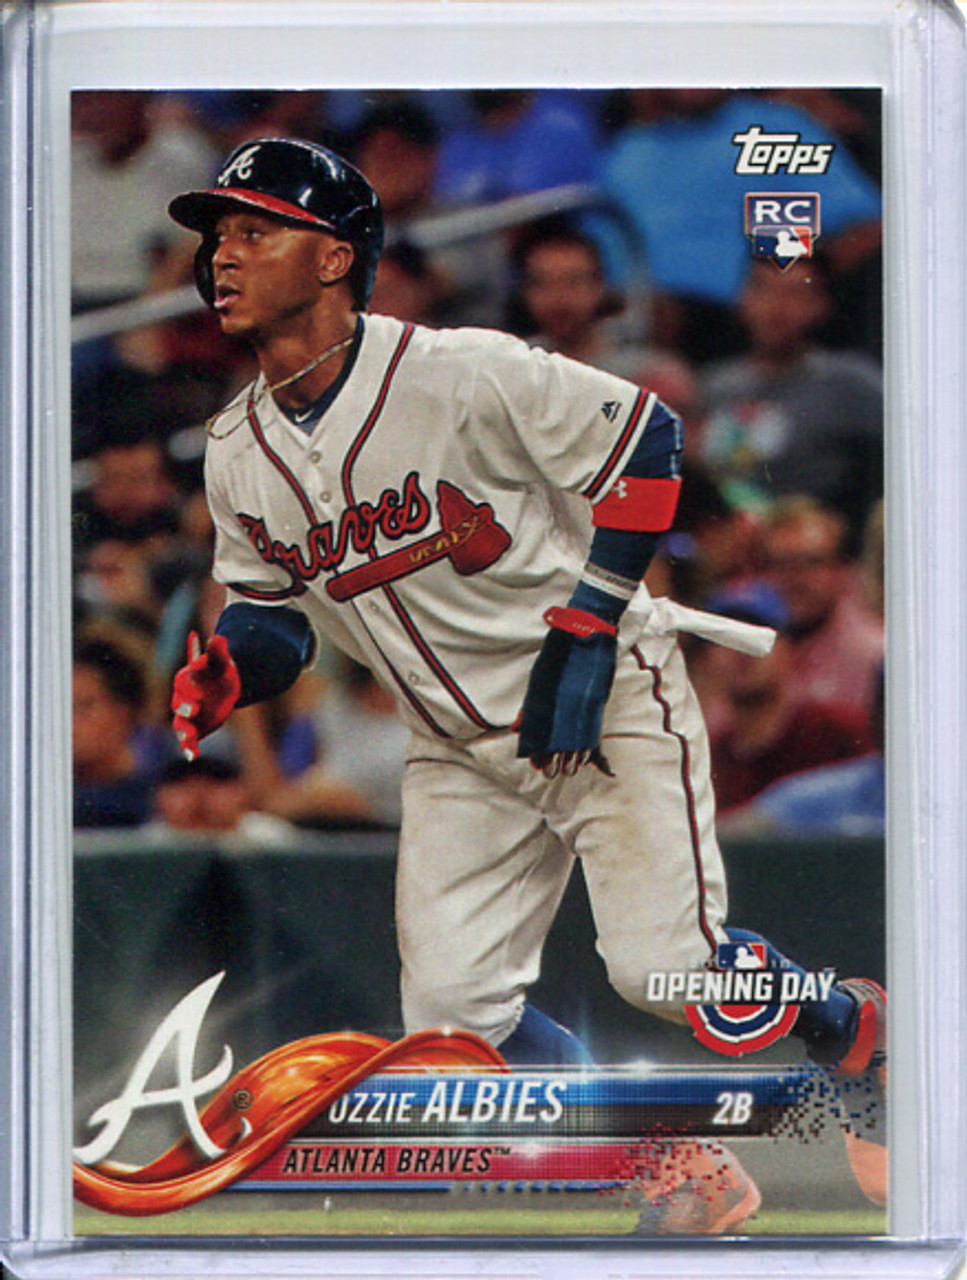 Ozzie Albies 2018 Opening Day #13